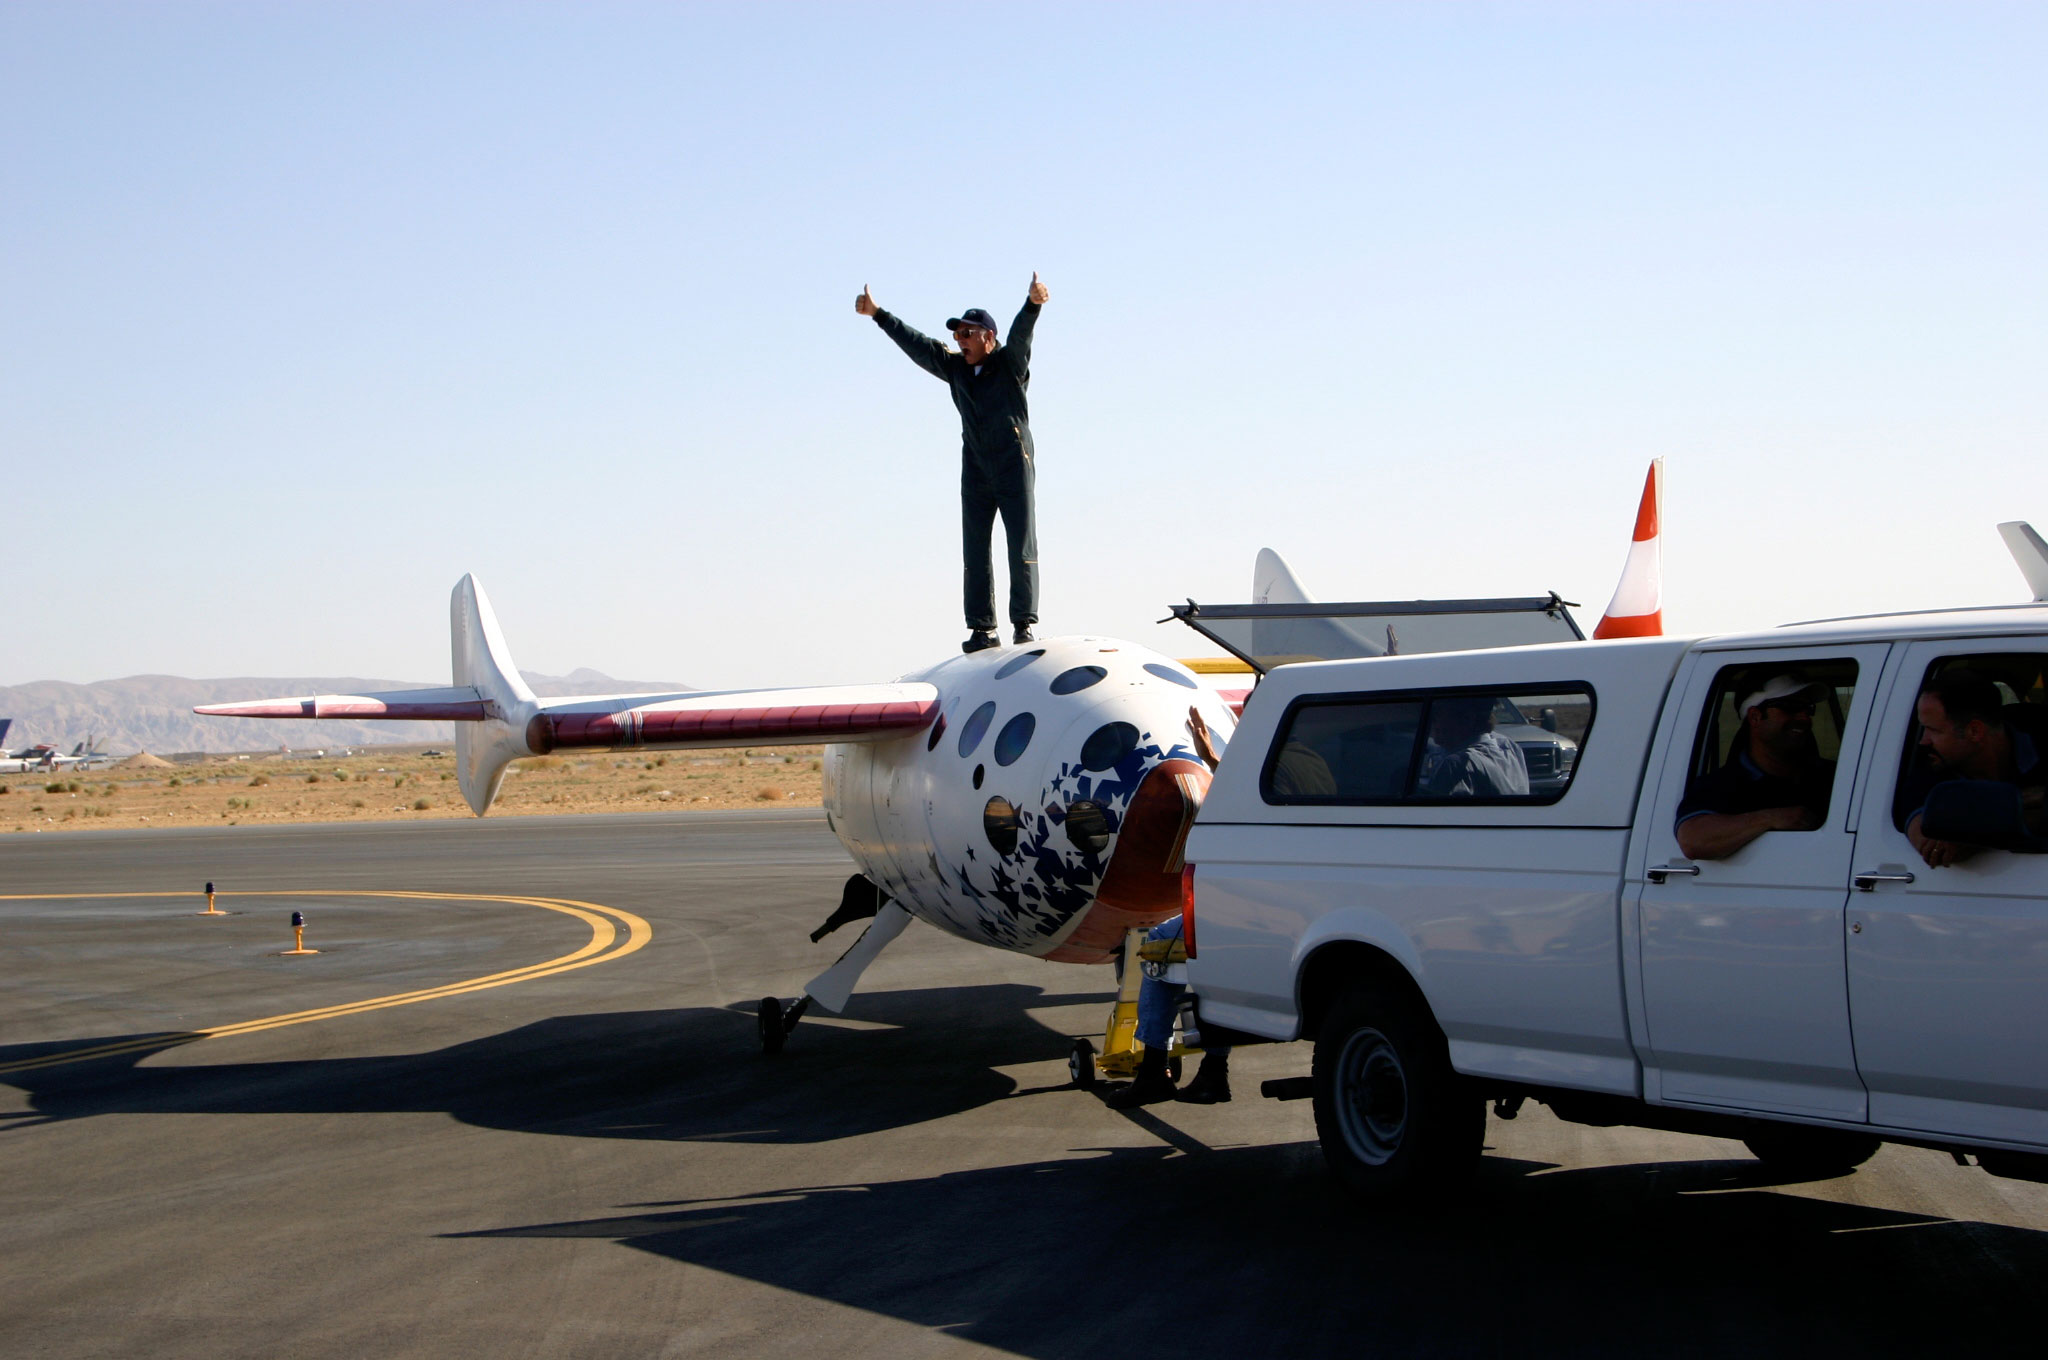 Mike Melvill celebrates atop SpaceShipOne after completion of his first of two trips to outer space aboard the vehicle. Credit: http://www.flickr.com/photos/densaer/